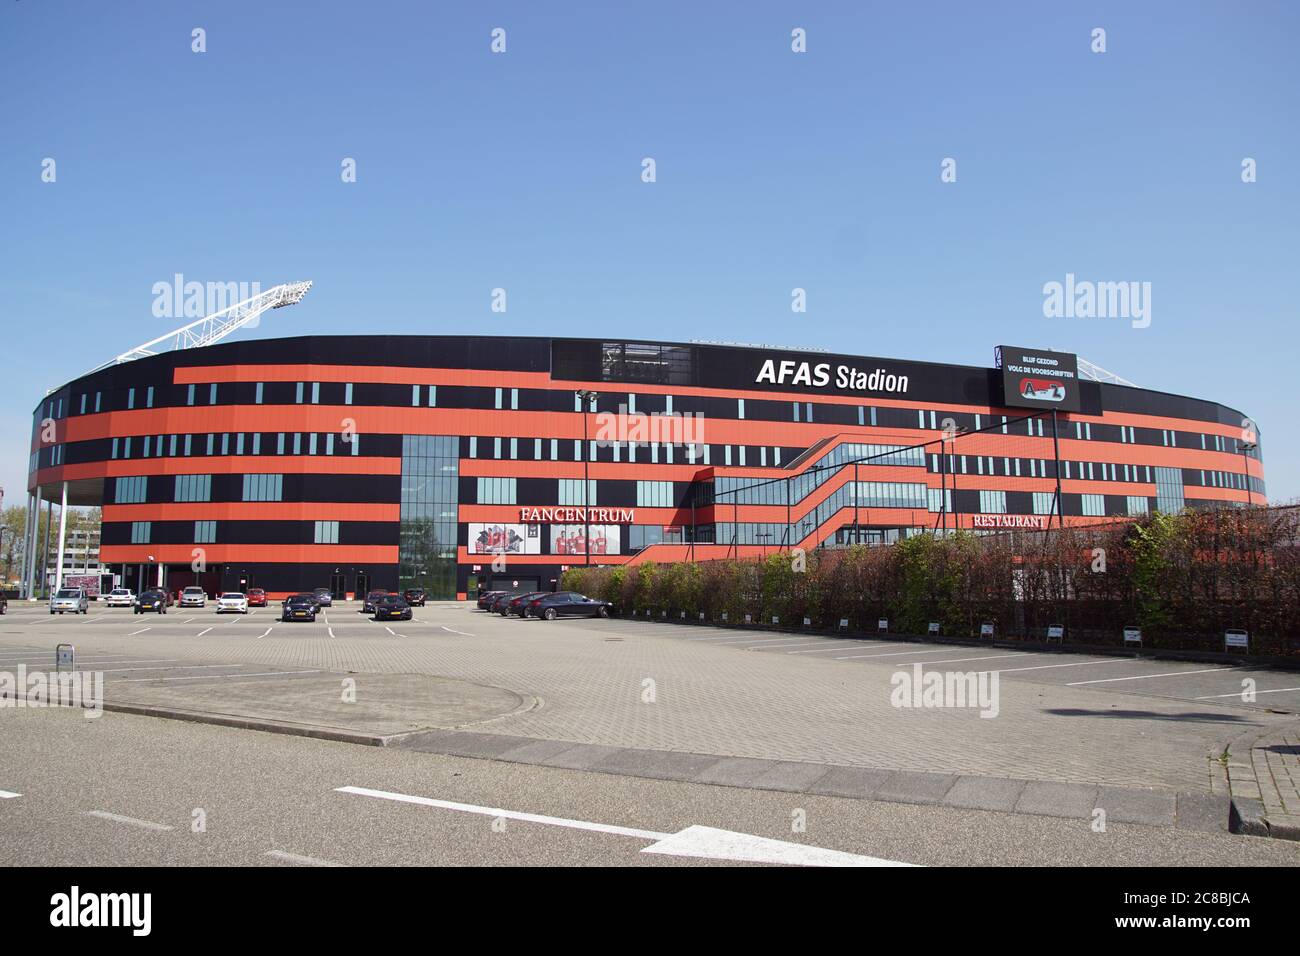 Afas soccer stadium (AFAS Stadion) of the football team AZ Alkmaar in the Dutch Province of North Holland. Netherlands, April Stock Photo